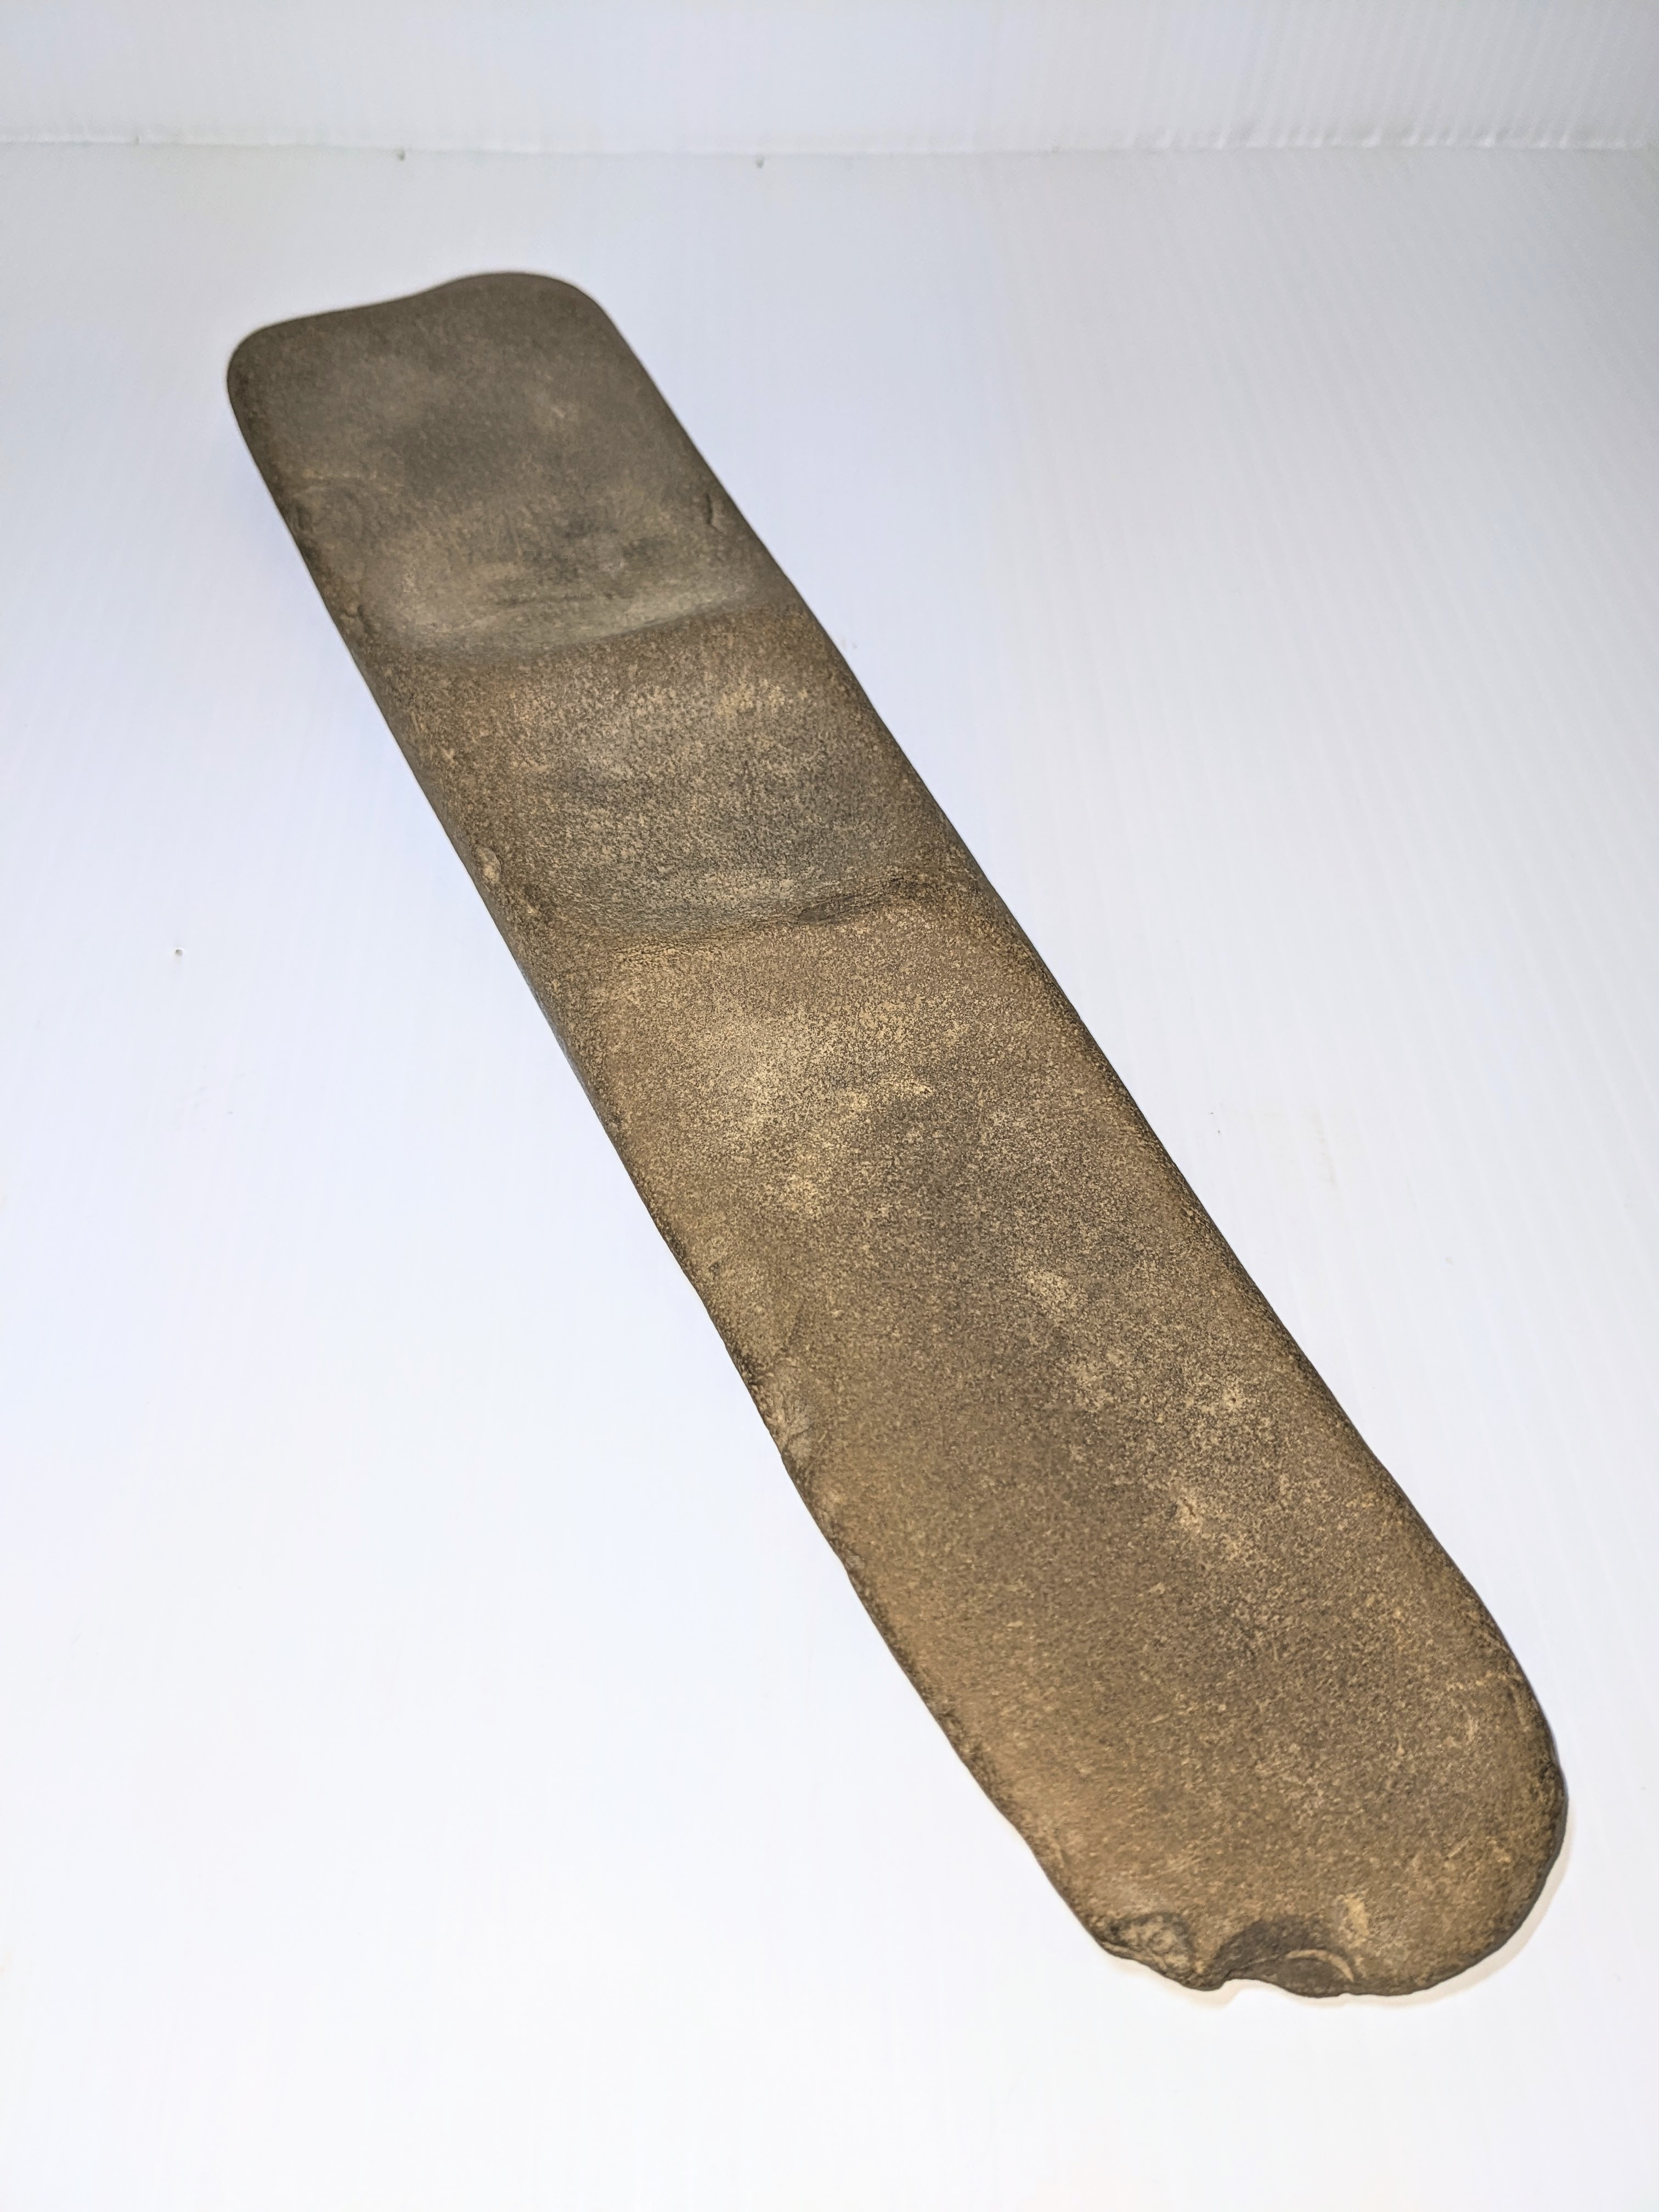 The artifact of the week is this unknown object. It is made of stone, has four depressions (3 visible on this side and one round one on the backside) and has the texture of fine sandpaper. Our best guess is a grindstone of some capacity - but we welcome your thoughts on what it's purpose may be! 
PS. It was found in a gravel pit near Fort - which just adds to the mystery! 
2003.18.01 / Lambert, Don